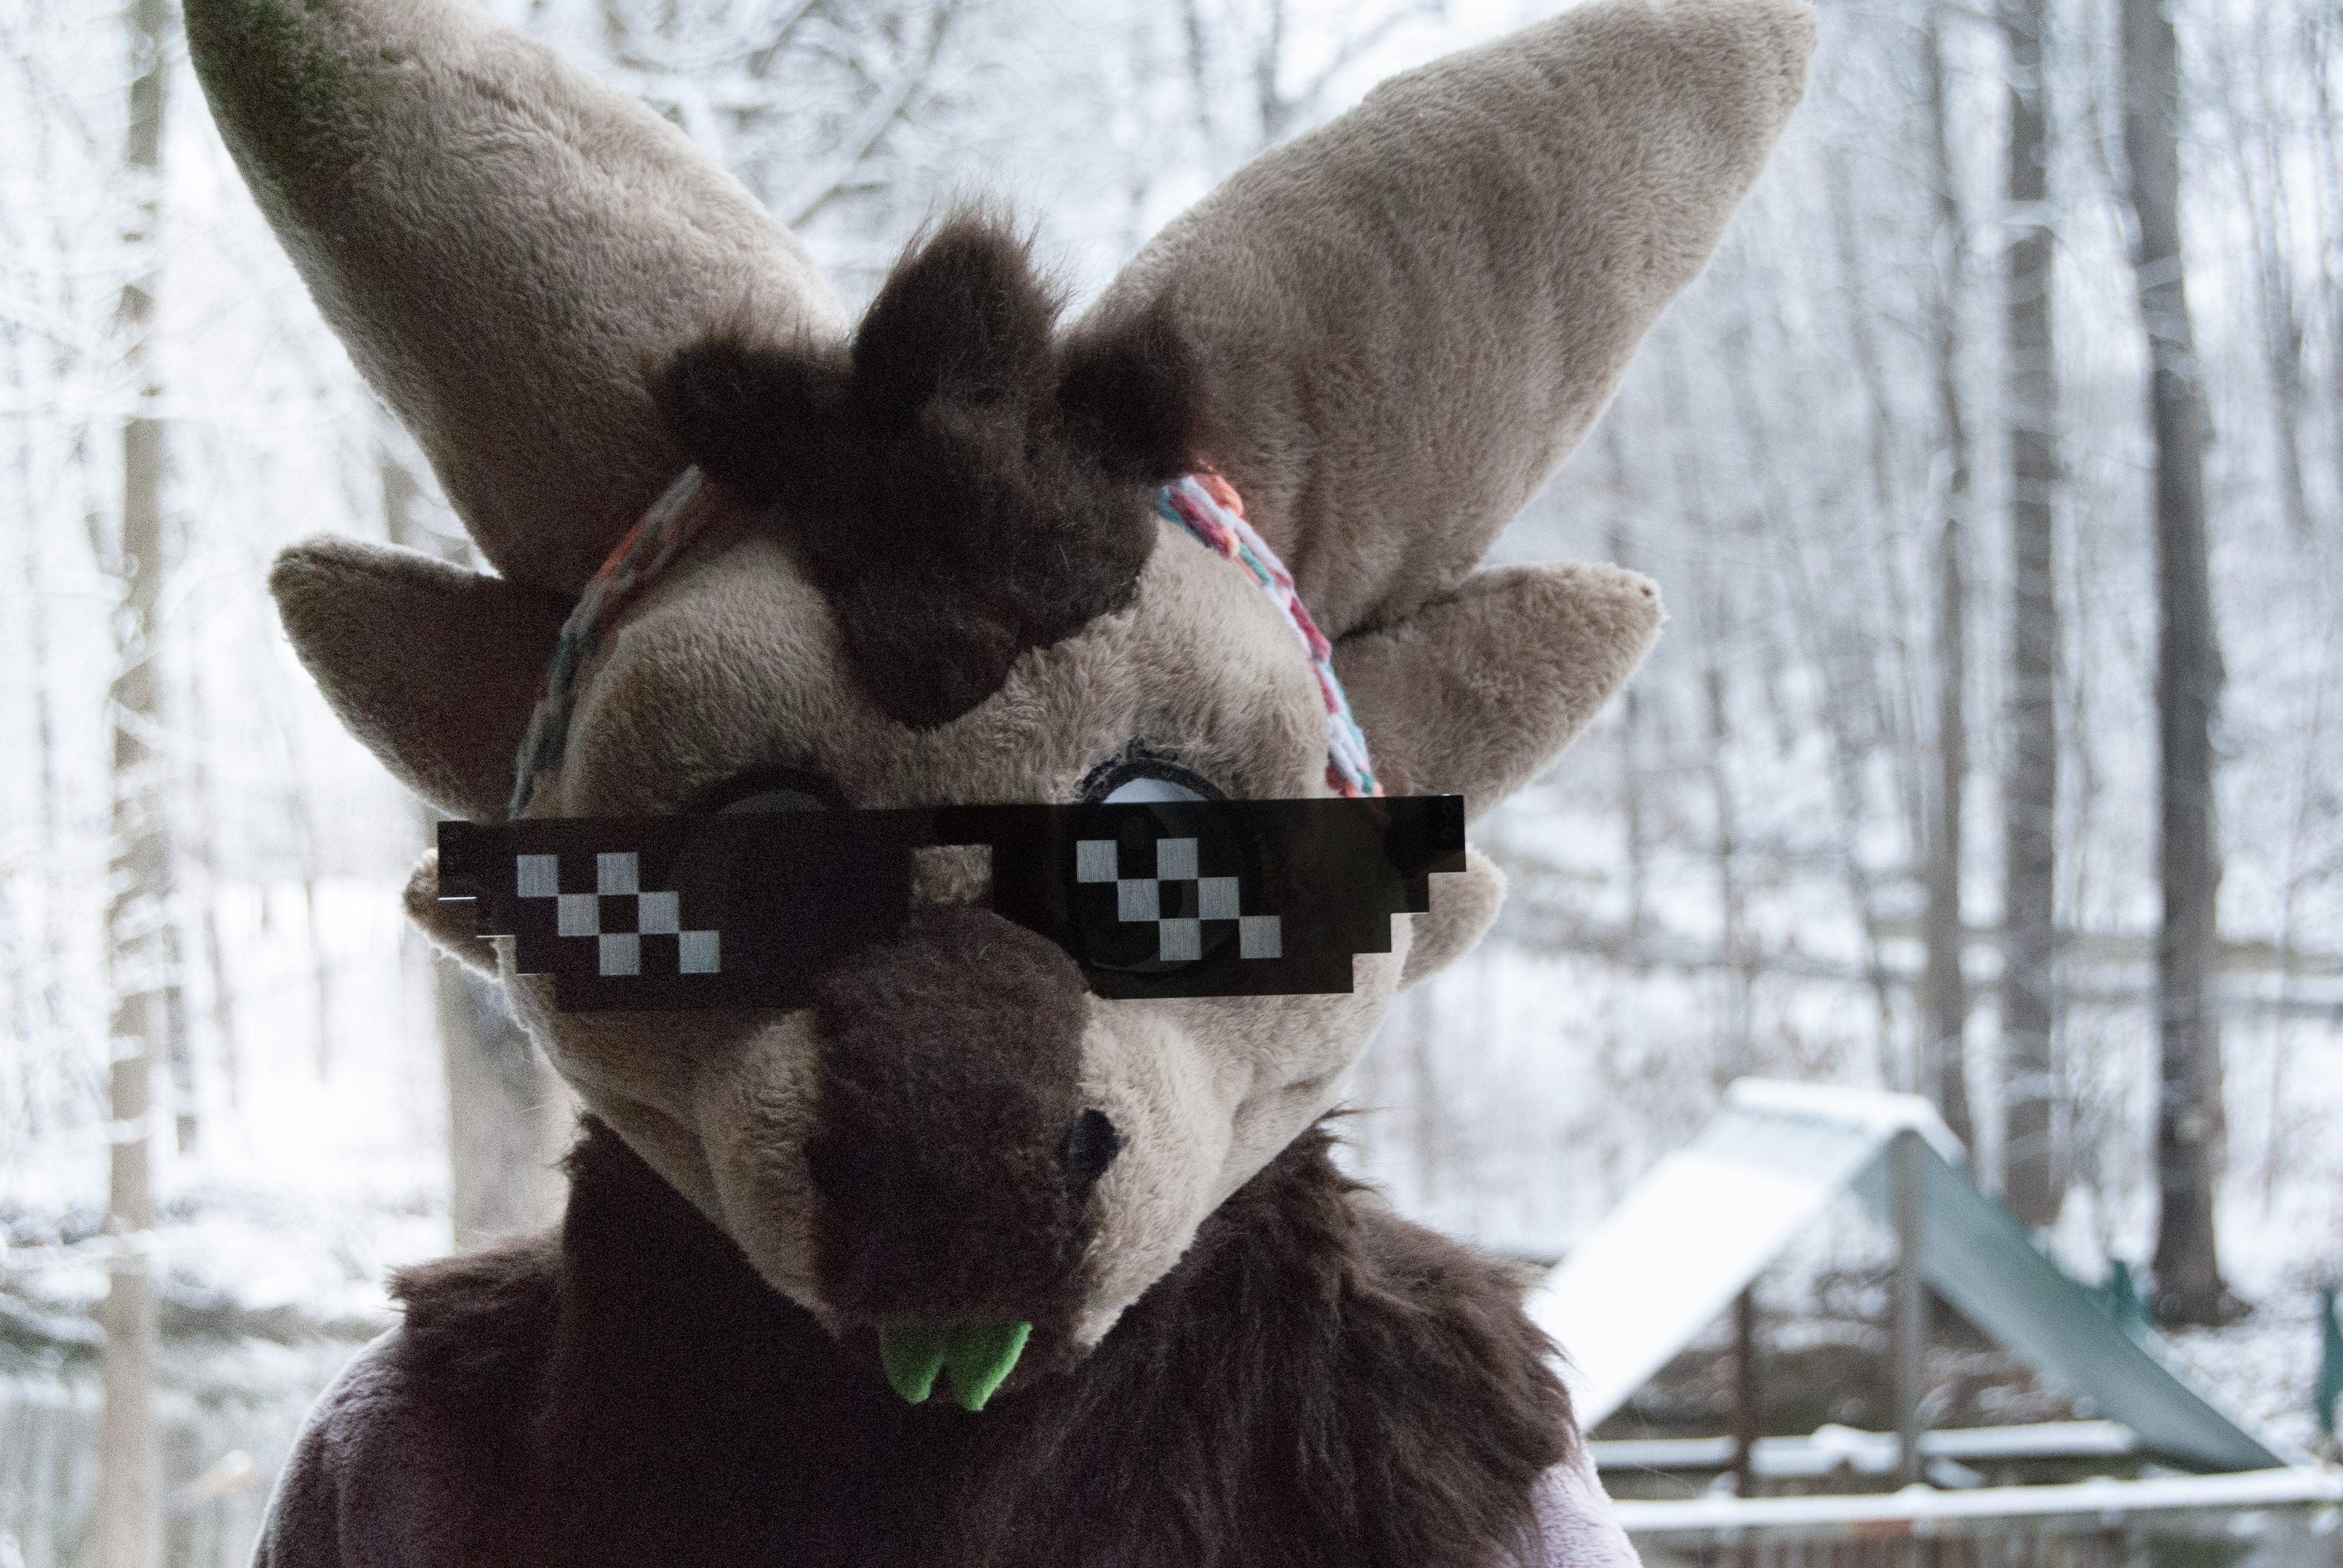 Deal With It Glasses for Fursuit